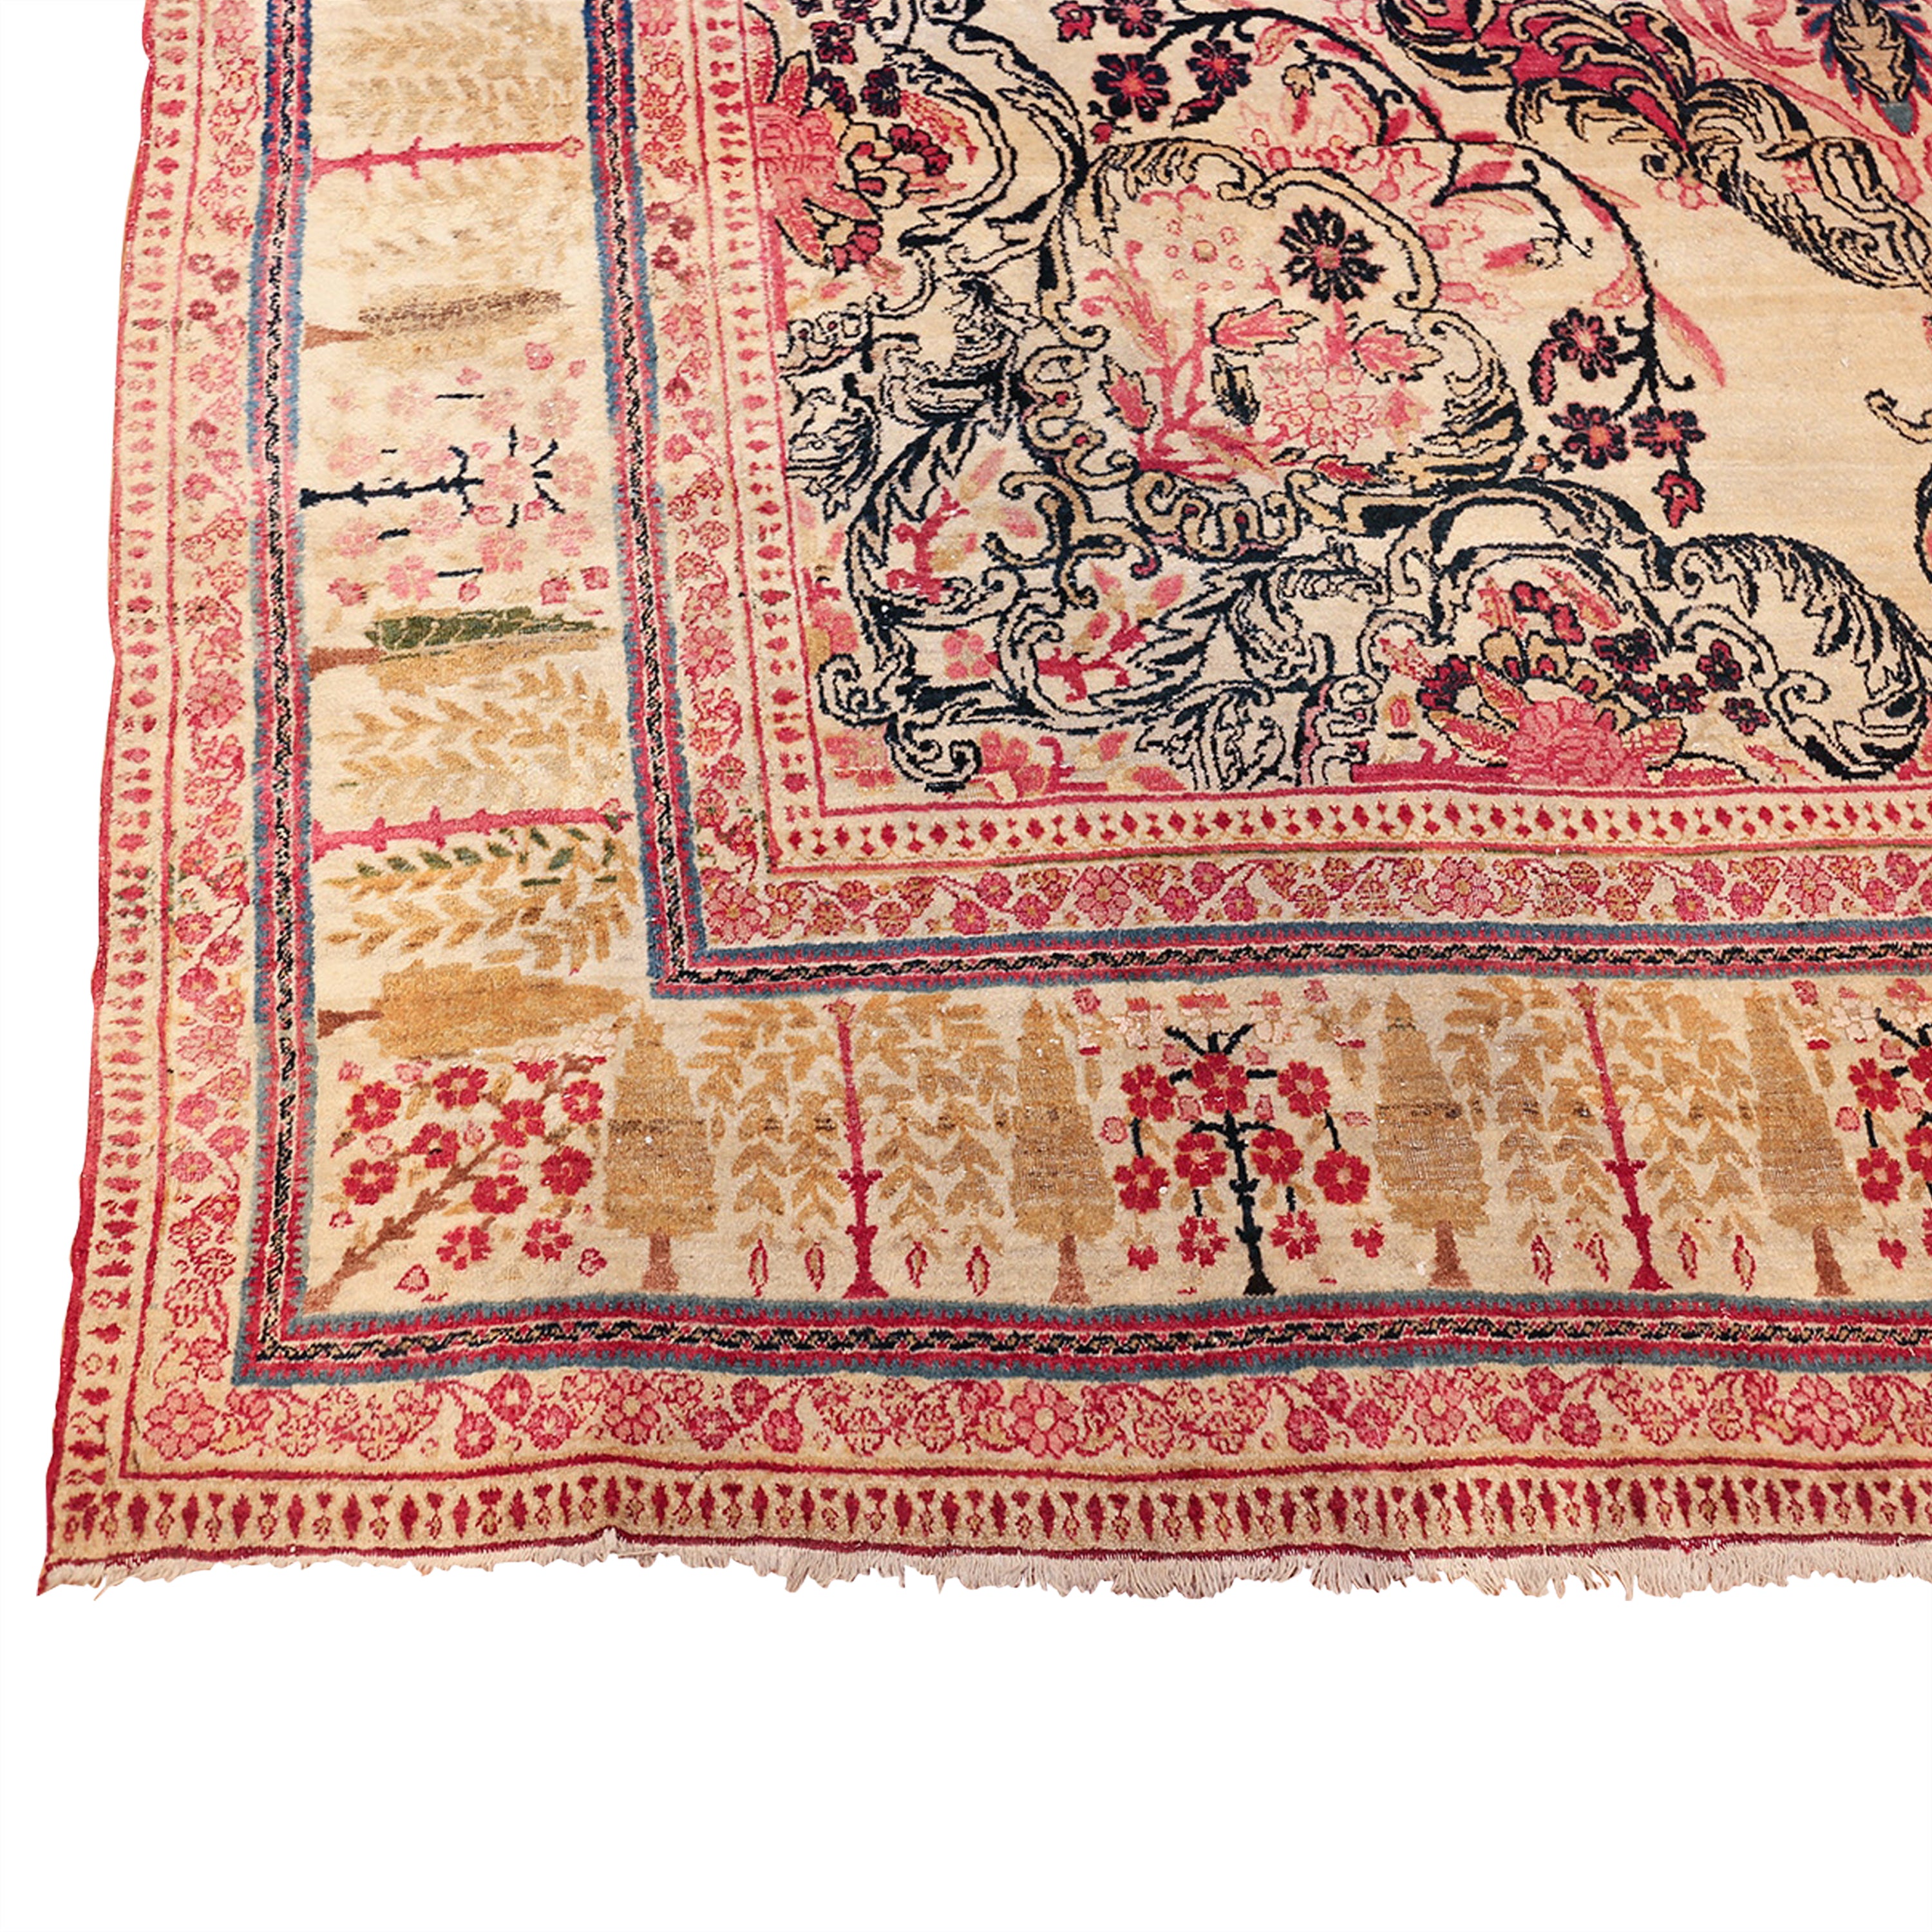 Gold and Red Antique Traditional Persian Kerman Rug - 9' x 12'4"